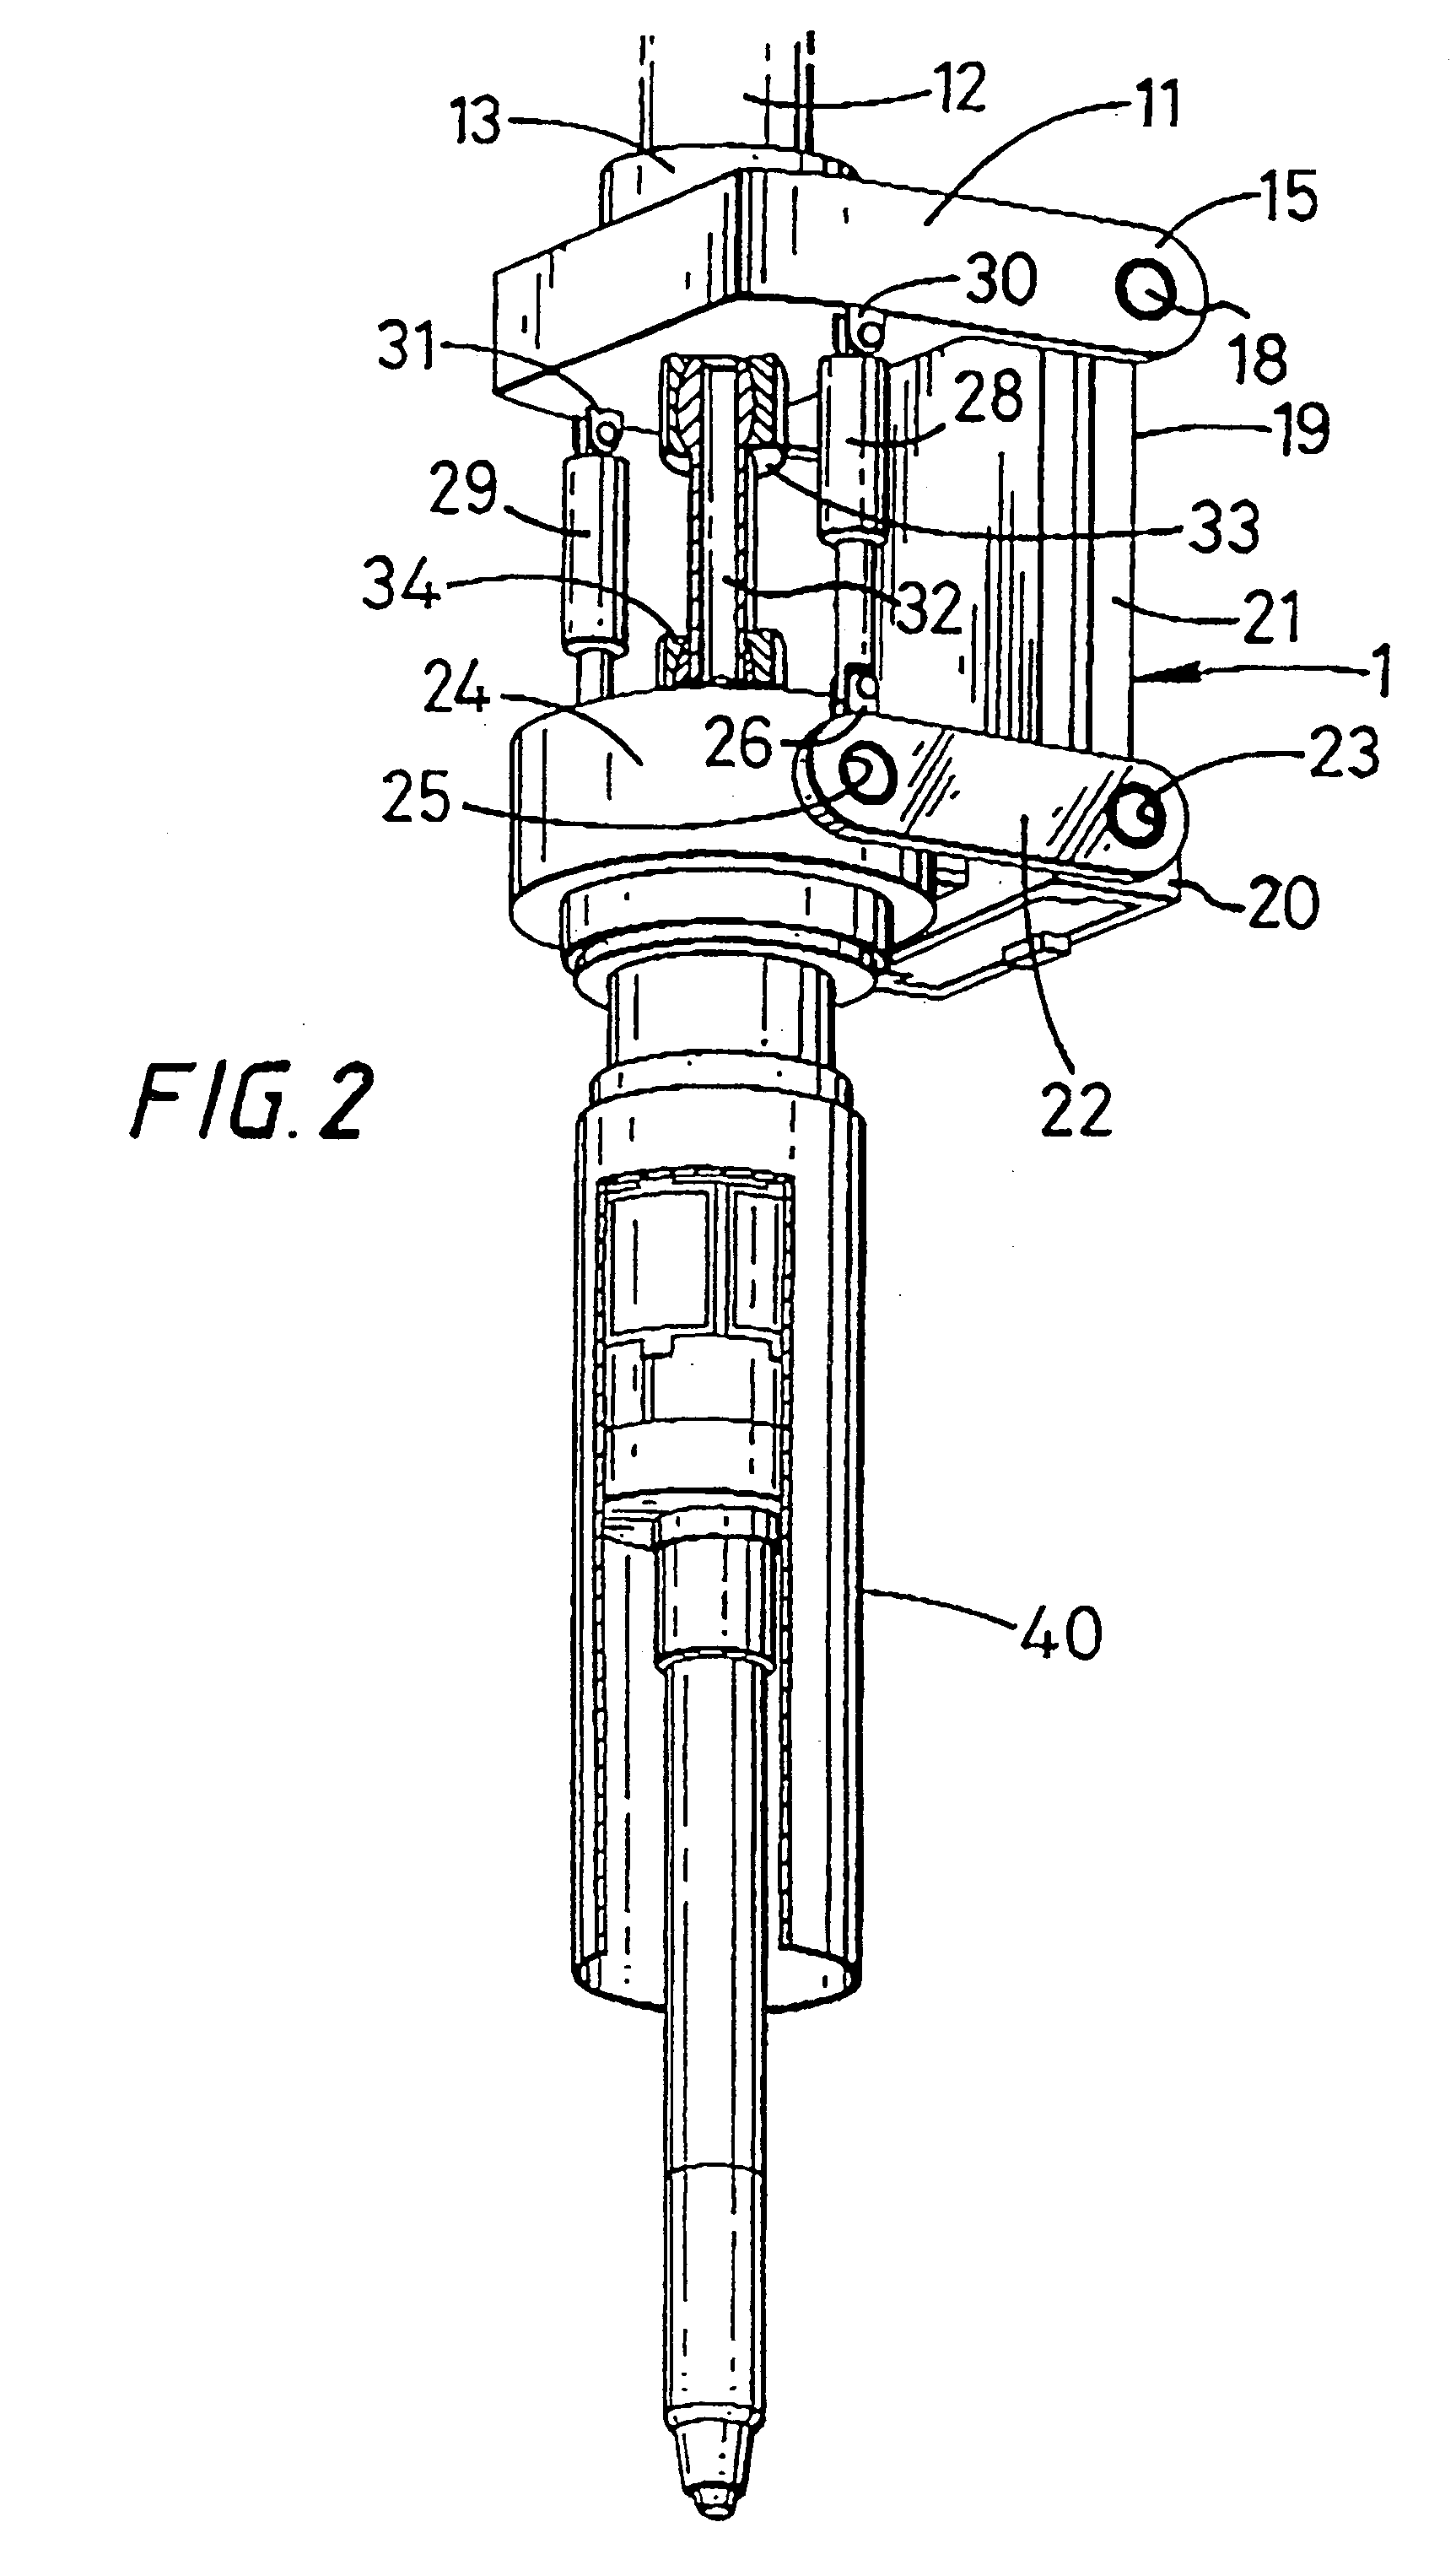 Methods and apparatus for connecting tubulars using a top drive